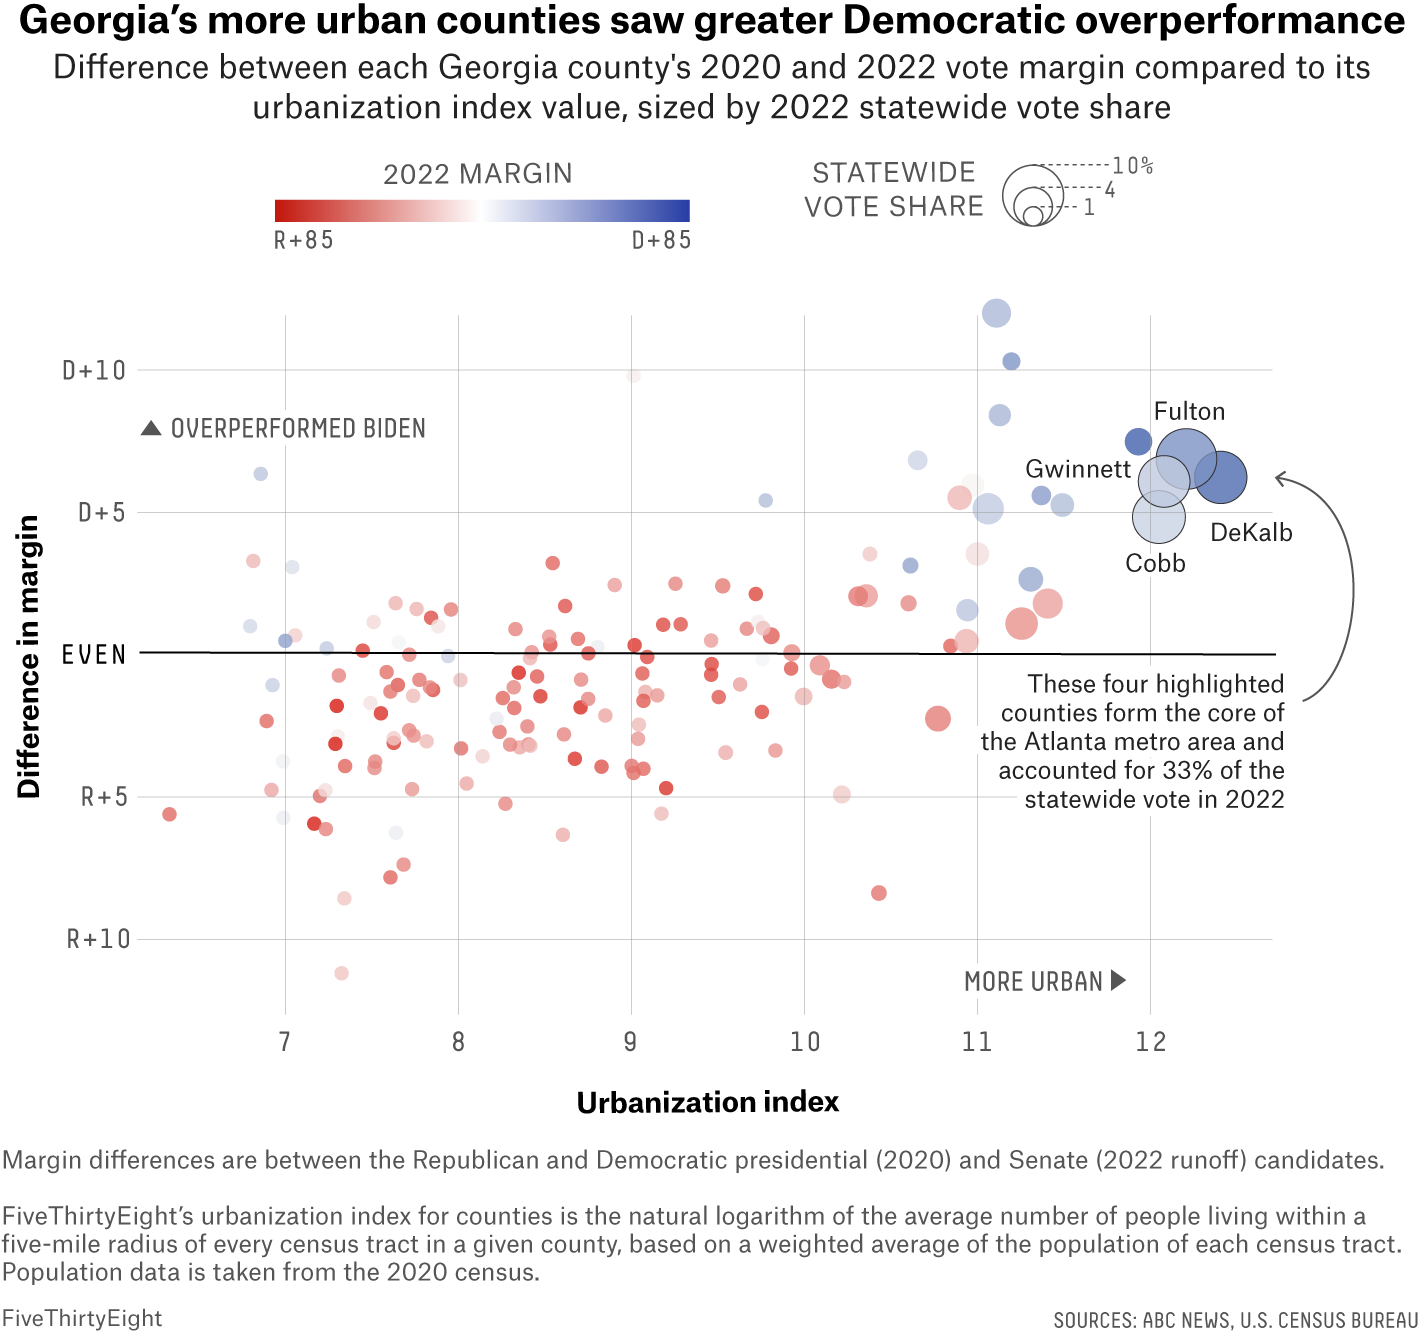 Scatterplot showing the difference between each Georgia county's 2020 presidential election and 2022 Senate race vote margin compared to its urbanization index, sized by 2022 statewide vote share. The largest and bluest bubbles are on the right of the plot, indicating they are more urban and suburban. Democratic Sen. Raphael Warnock ran a few points ahead of Biden in these counties.